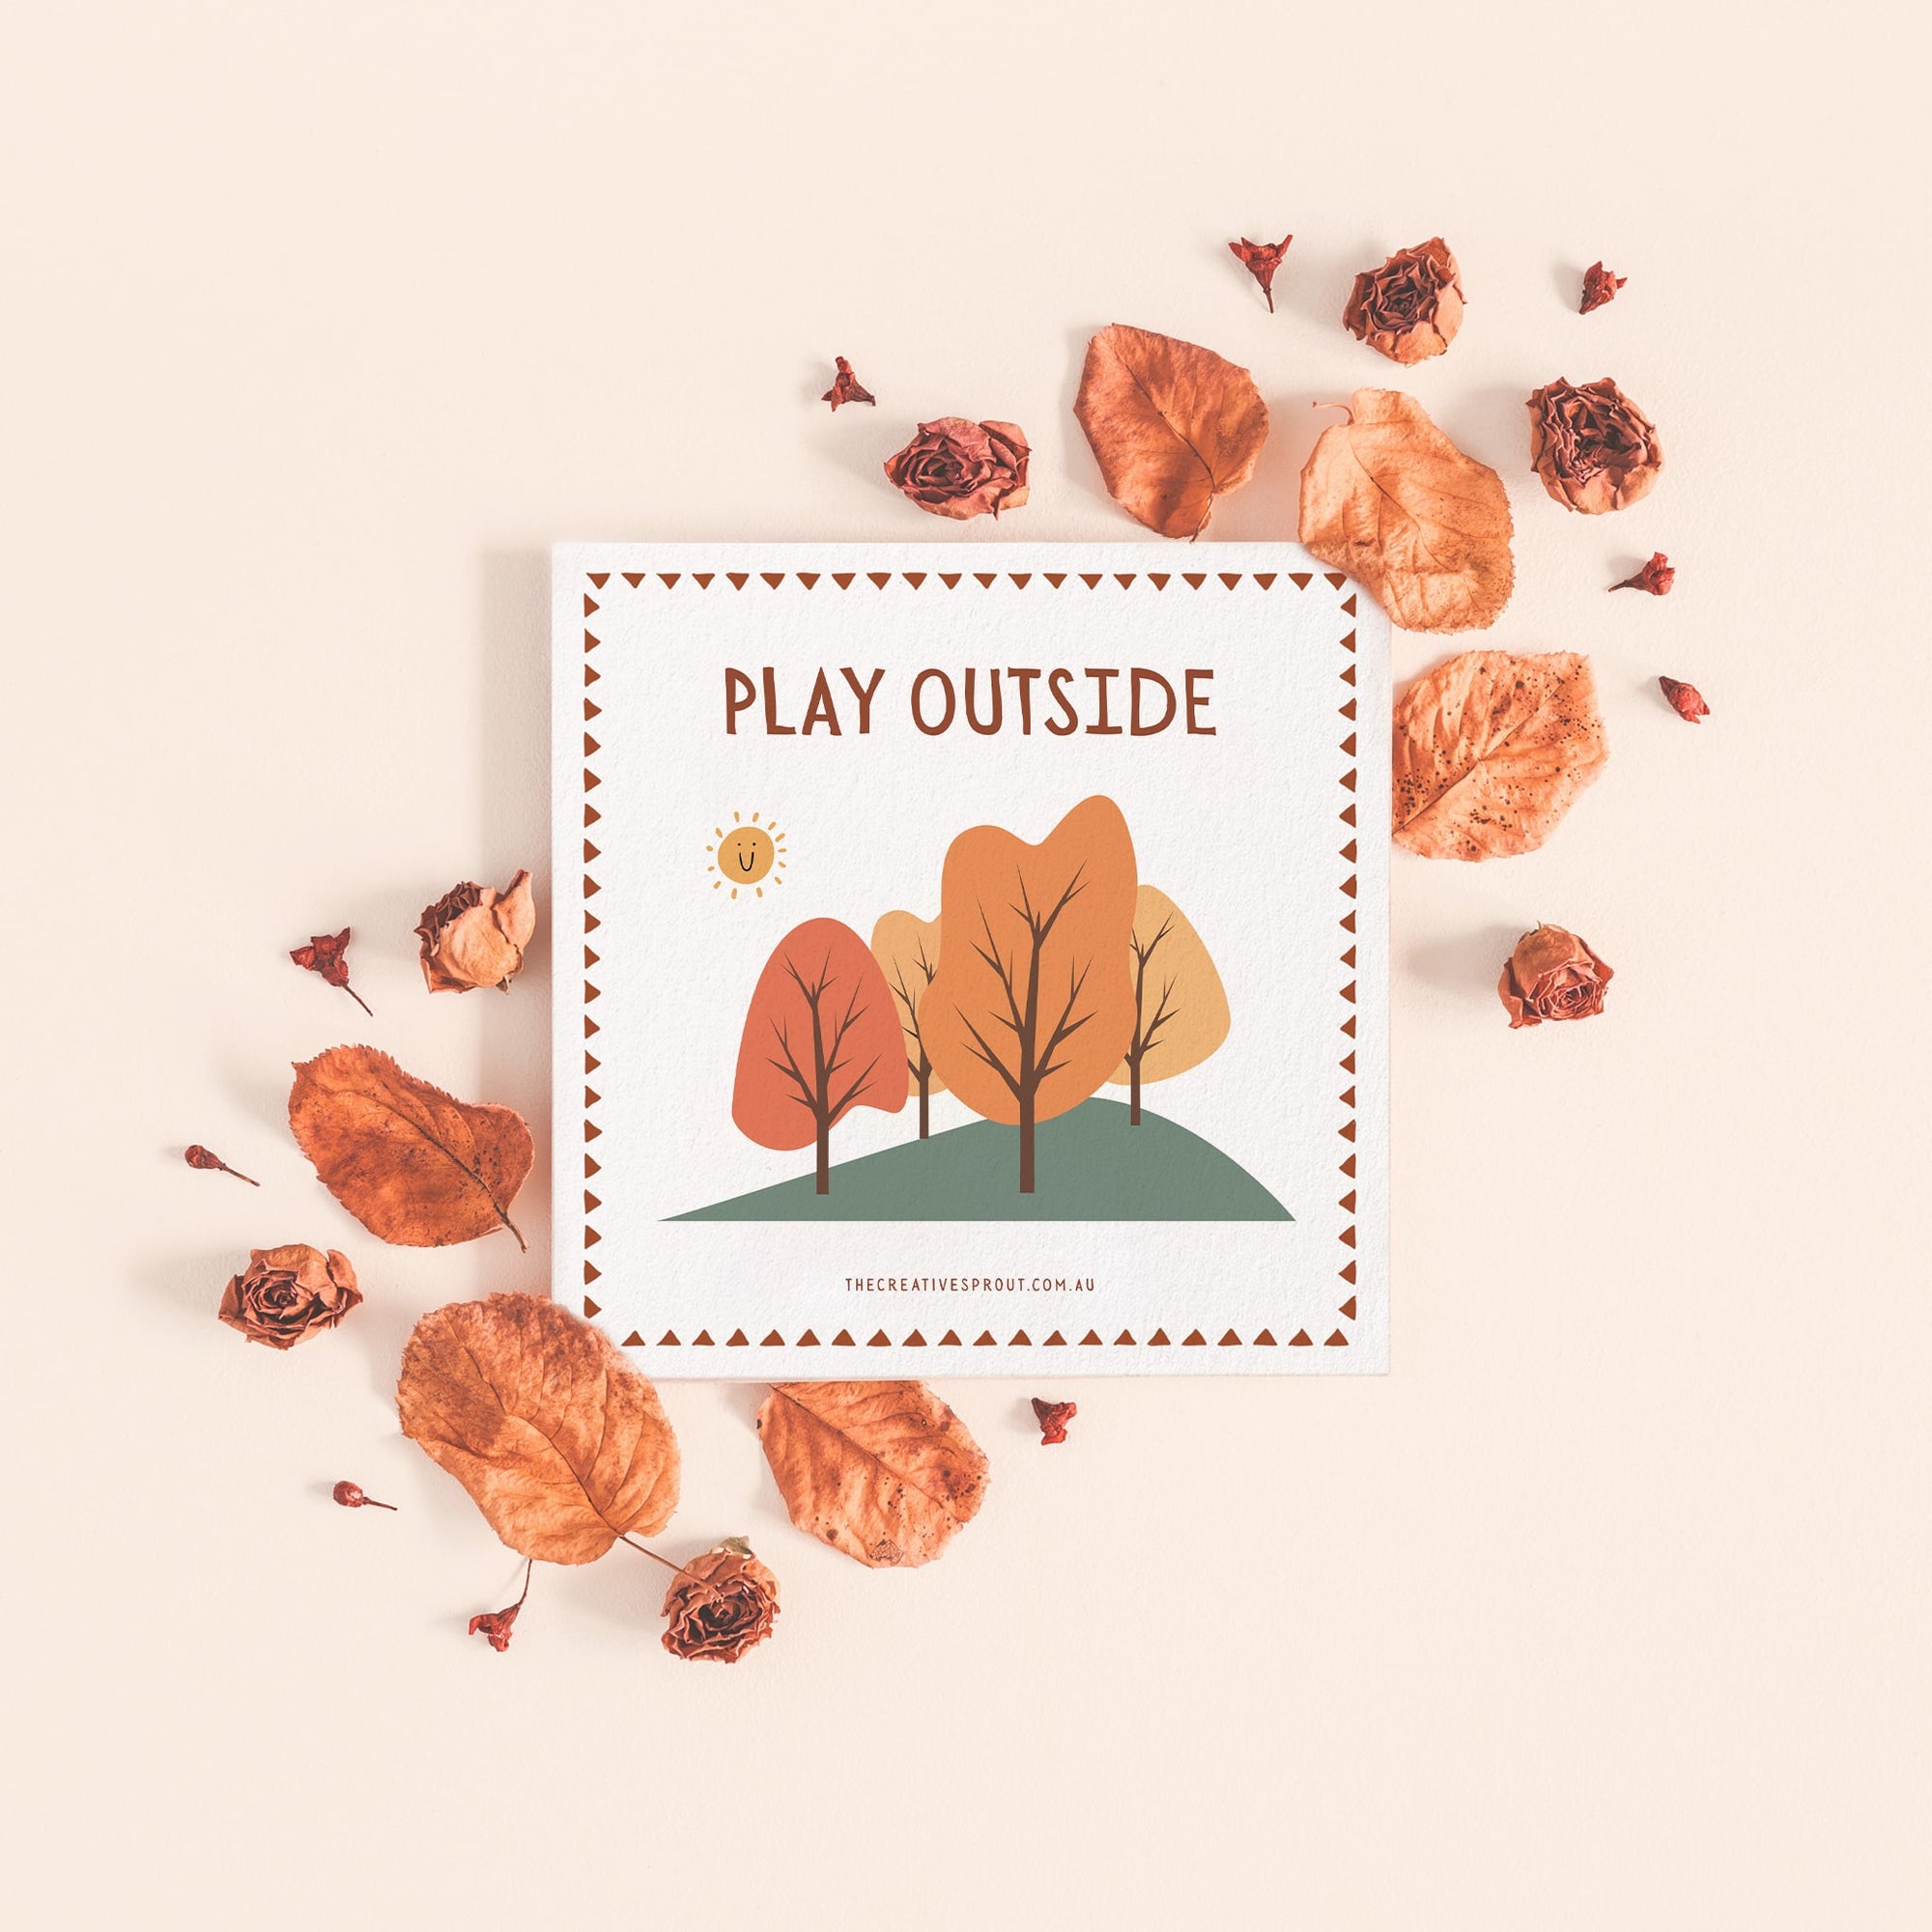 visual schedule card showing play outside illustration